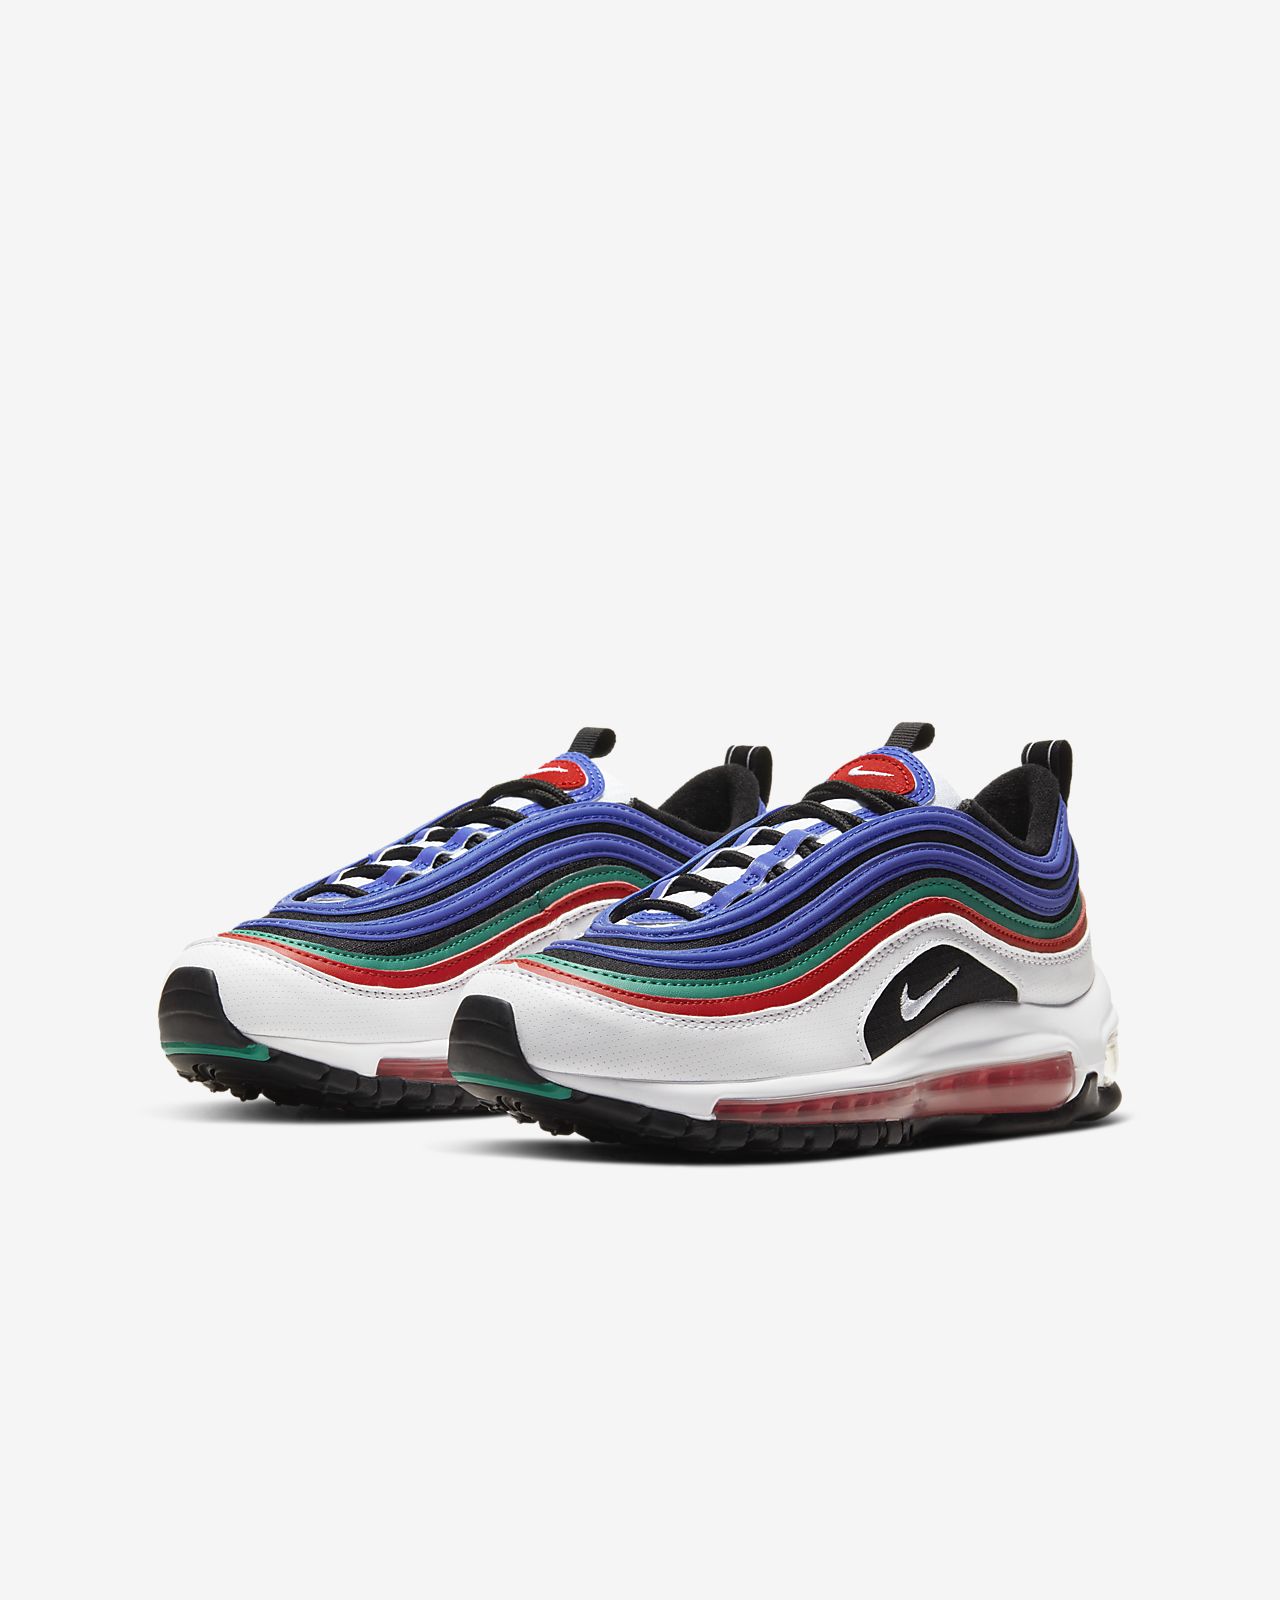 red white and blue air max 97